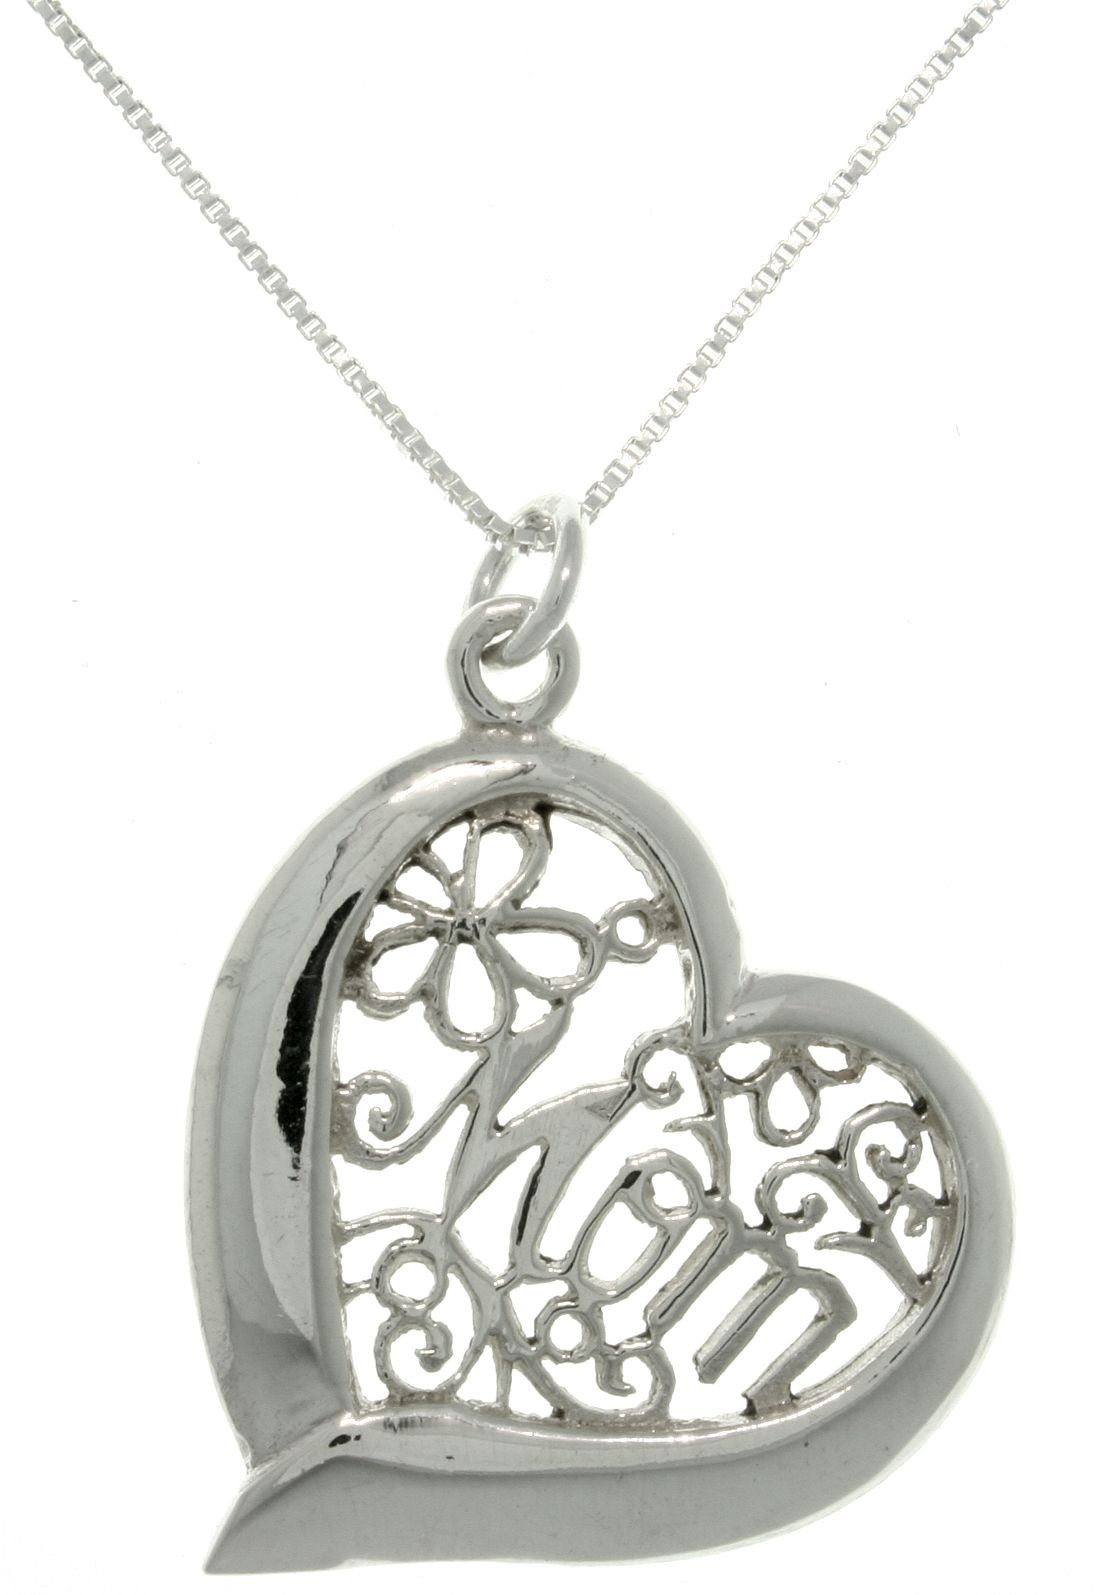 Jewelry Trends Sterling Silver Mom Heart Pendant on 18 Inch Box Chain Necklace Mothers Day Gift